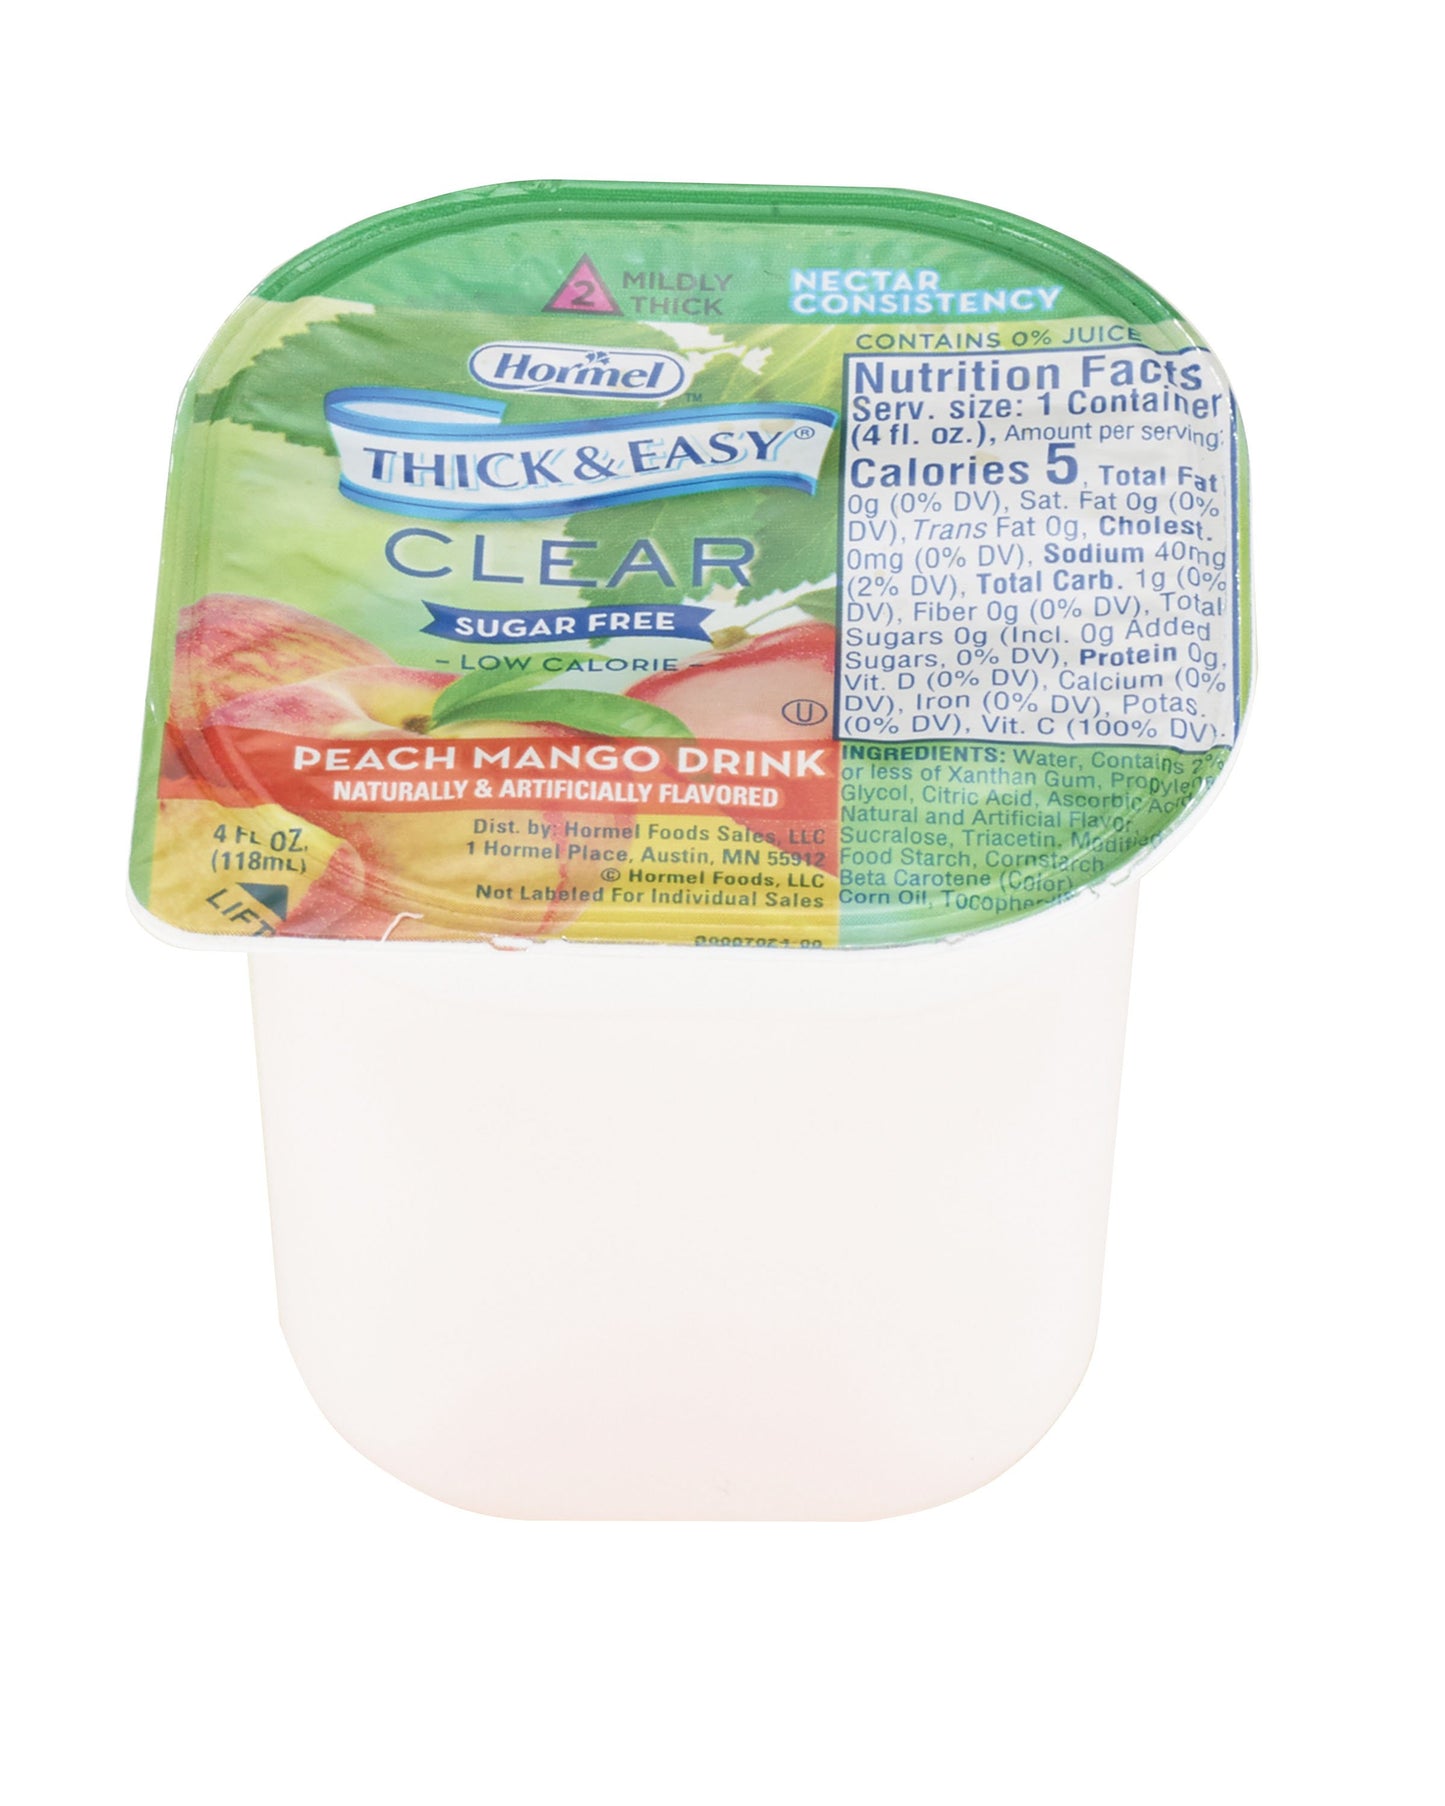 Thick & Easy Clear Nectar Consistency Sugar-Free Peach Mango Thickened Beverage, 4 oz. Cup